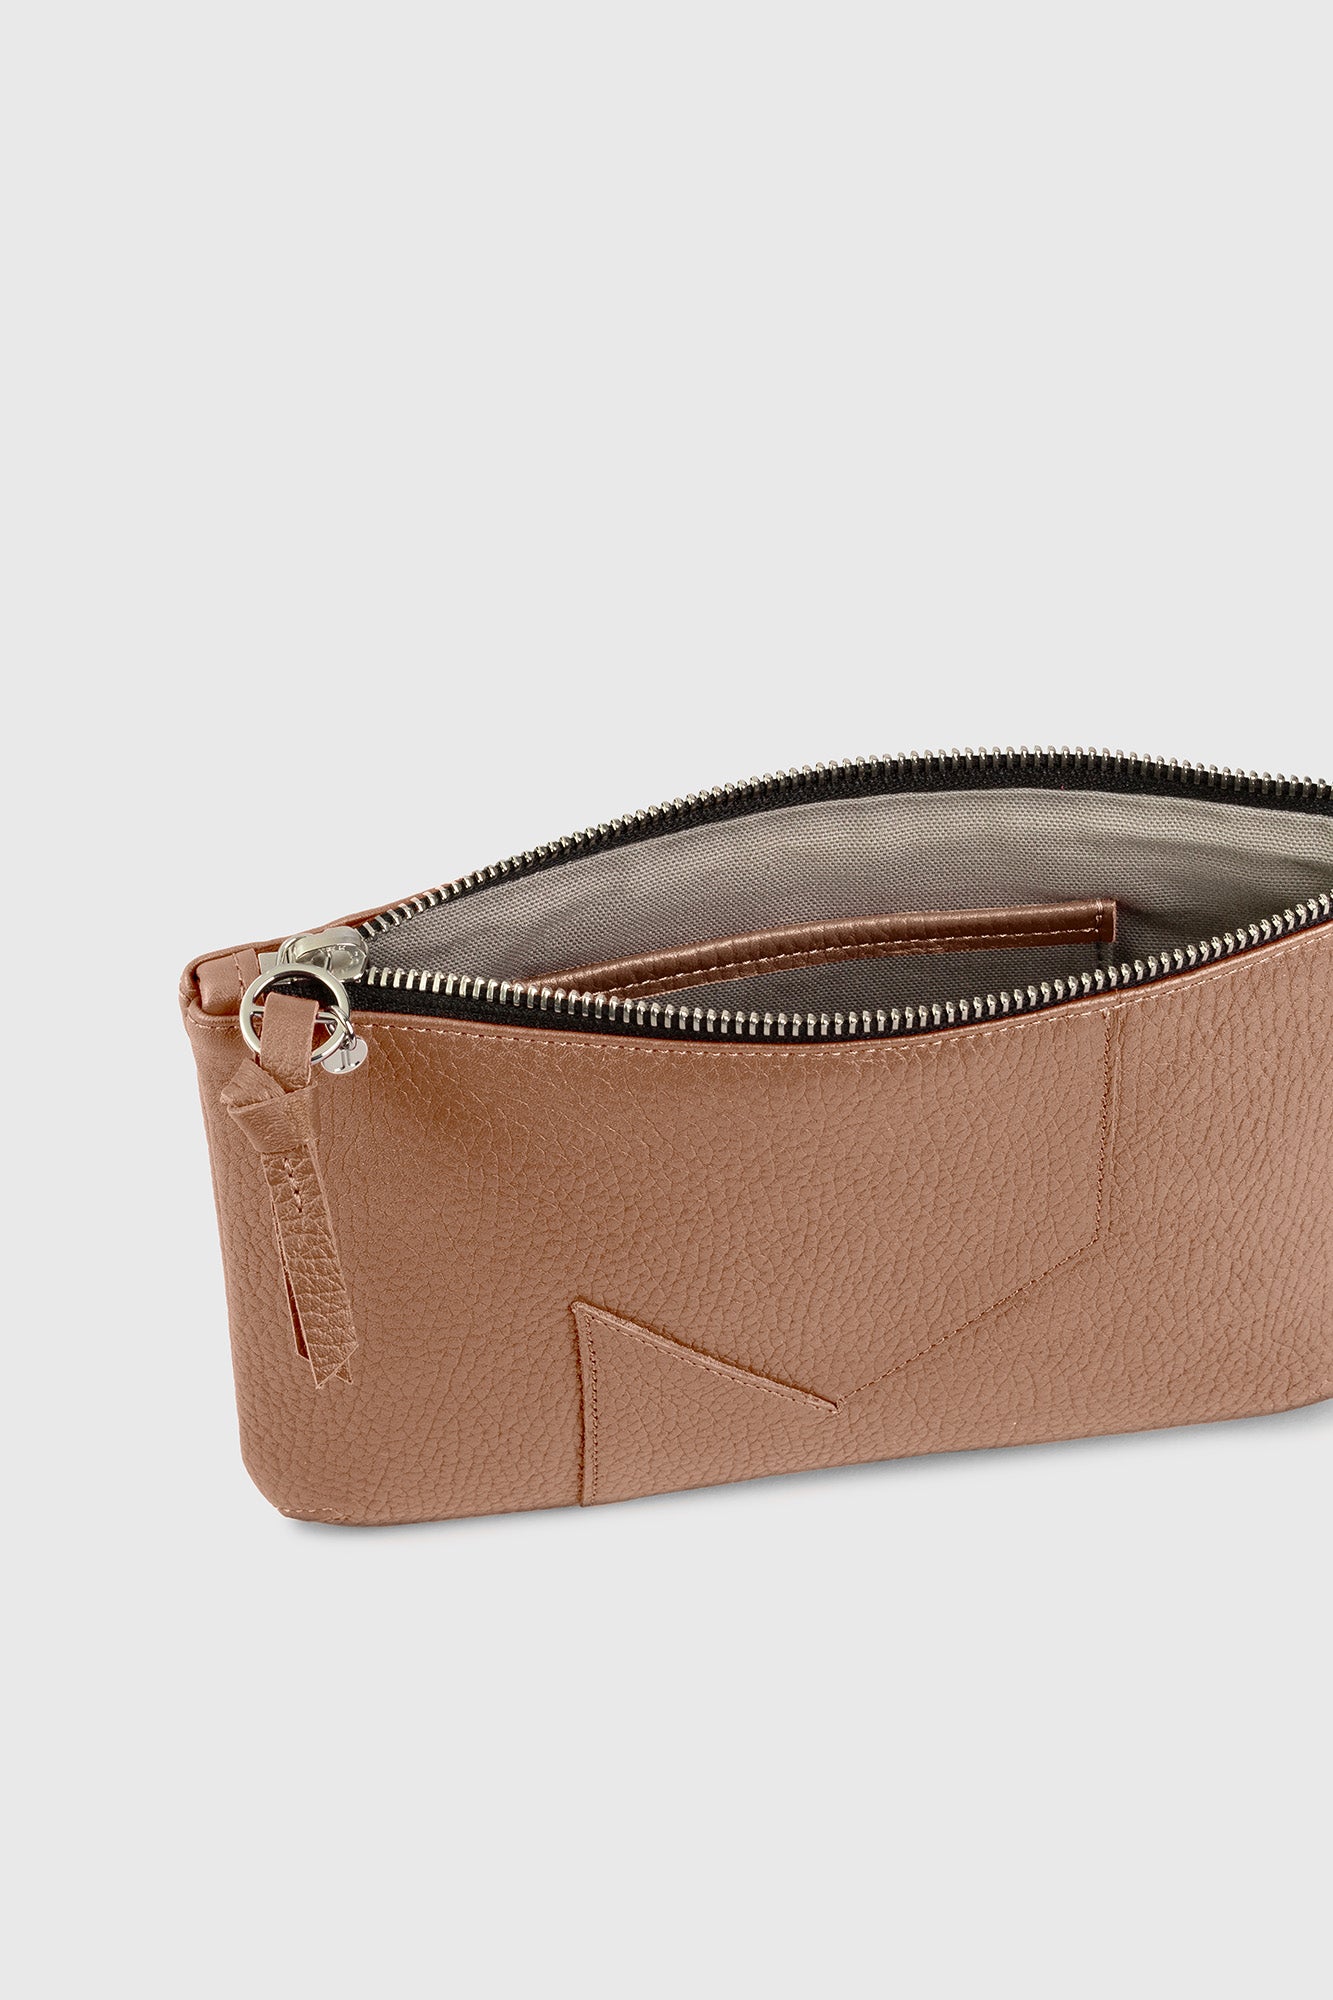 JL pouch leather - Warm sand